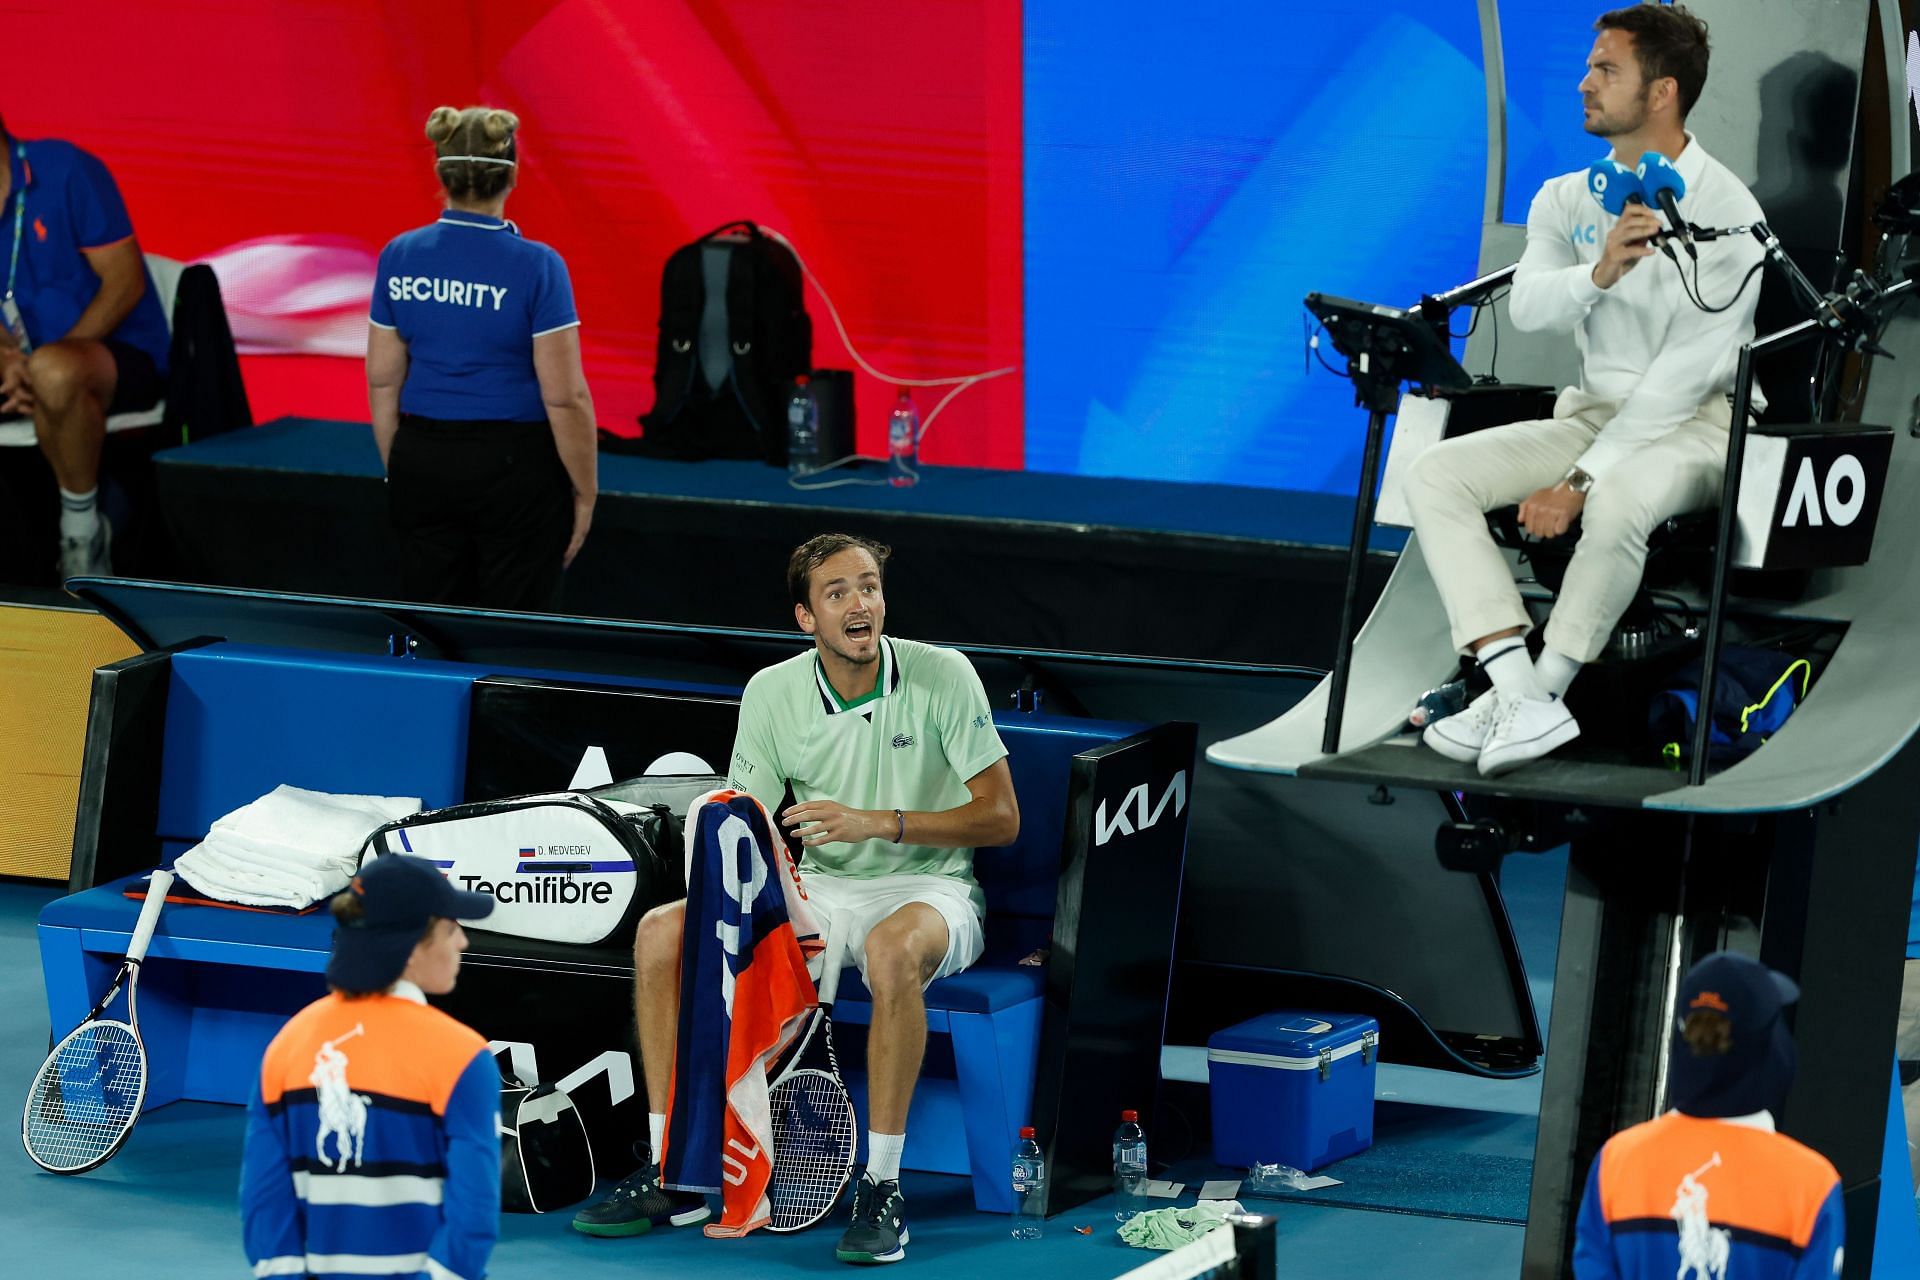 Daniil Medvedev in a heated discussion with Jaume Campistol at the Australian Open